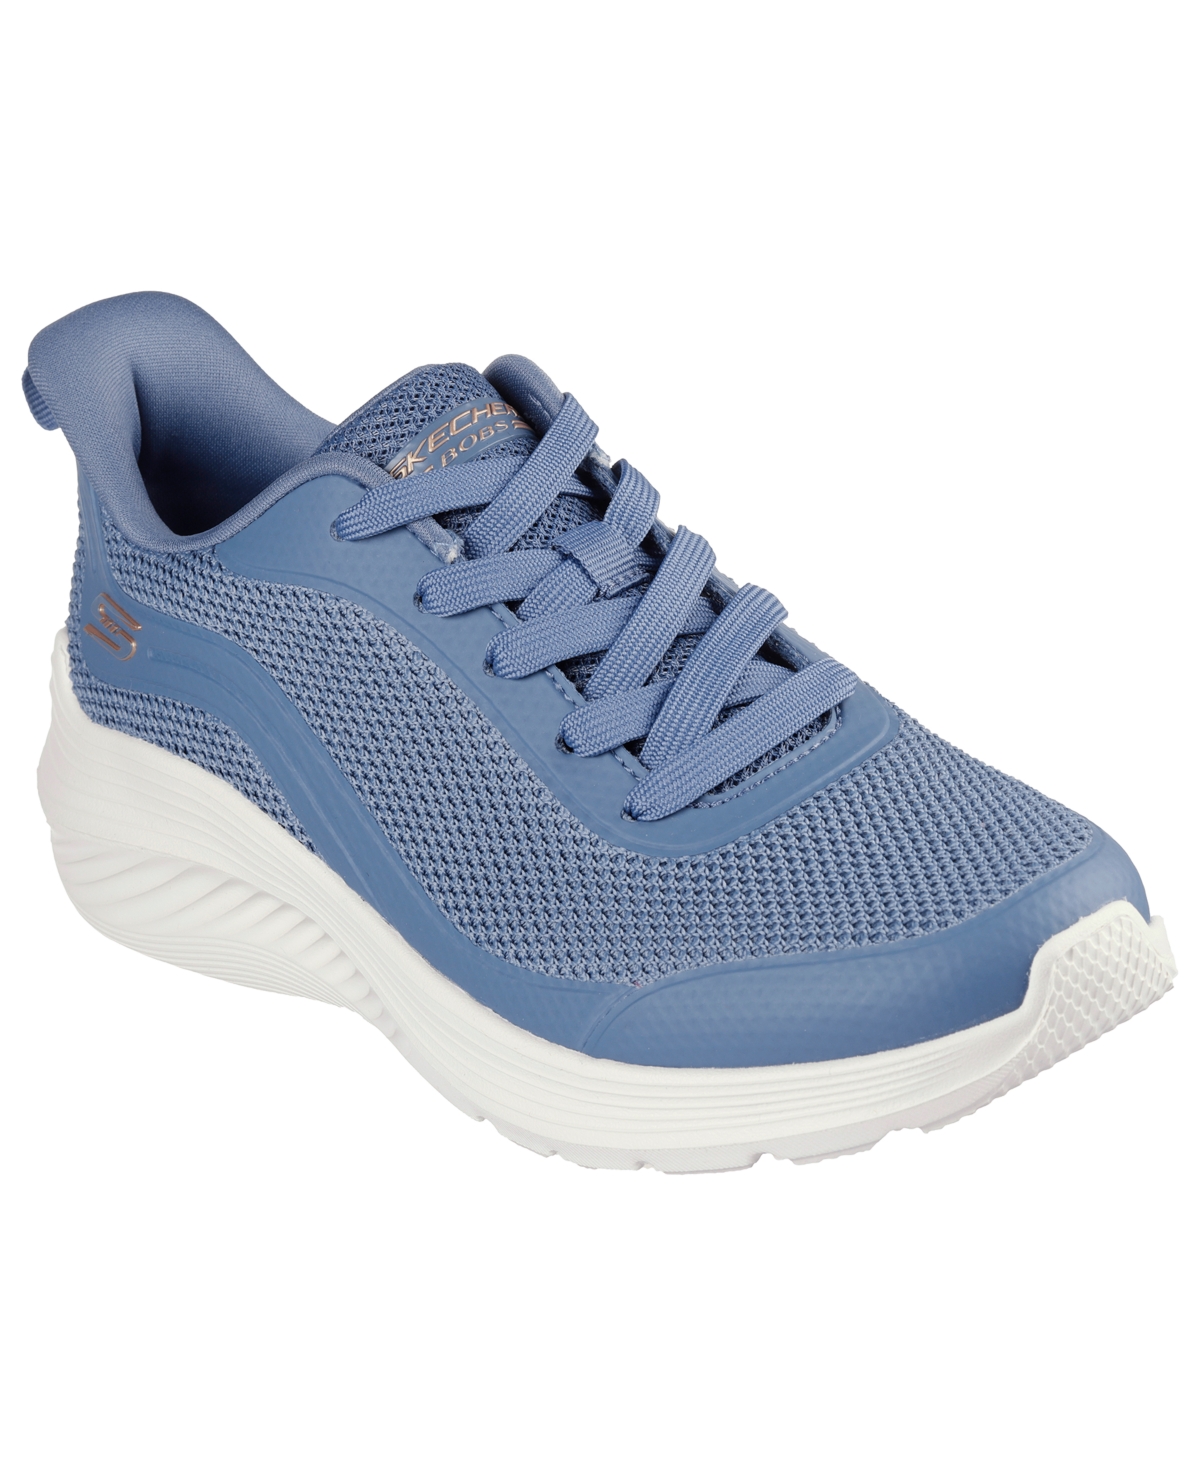 Women's Bobs Sport Squad - Waves Casual Sneakers from Finish Line - Slate